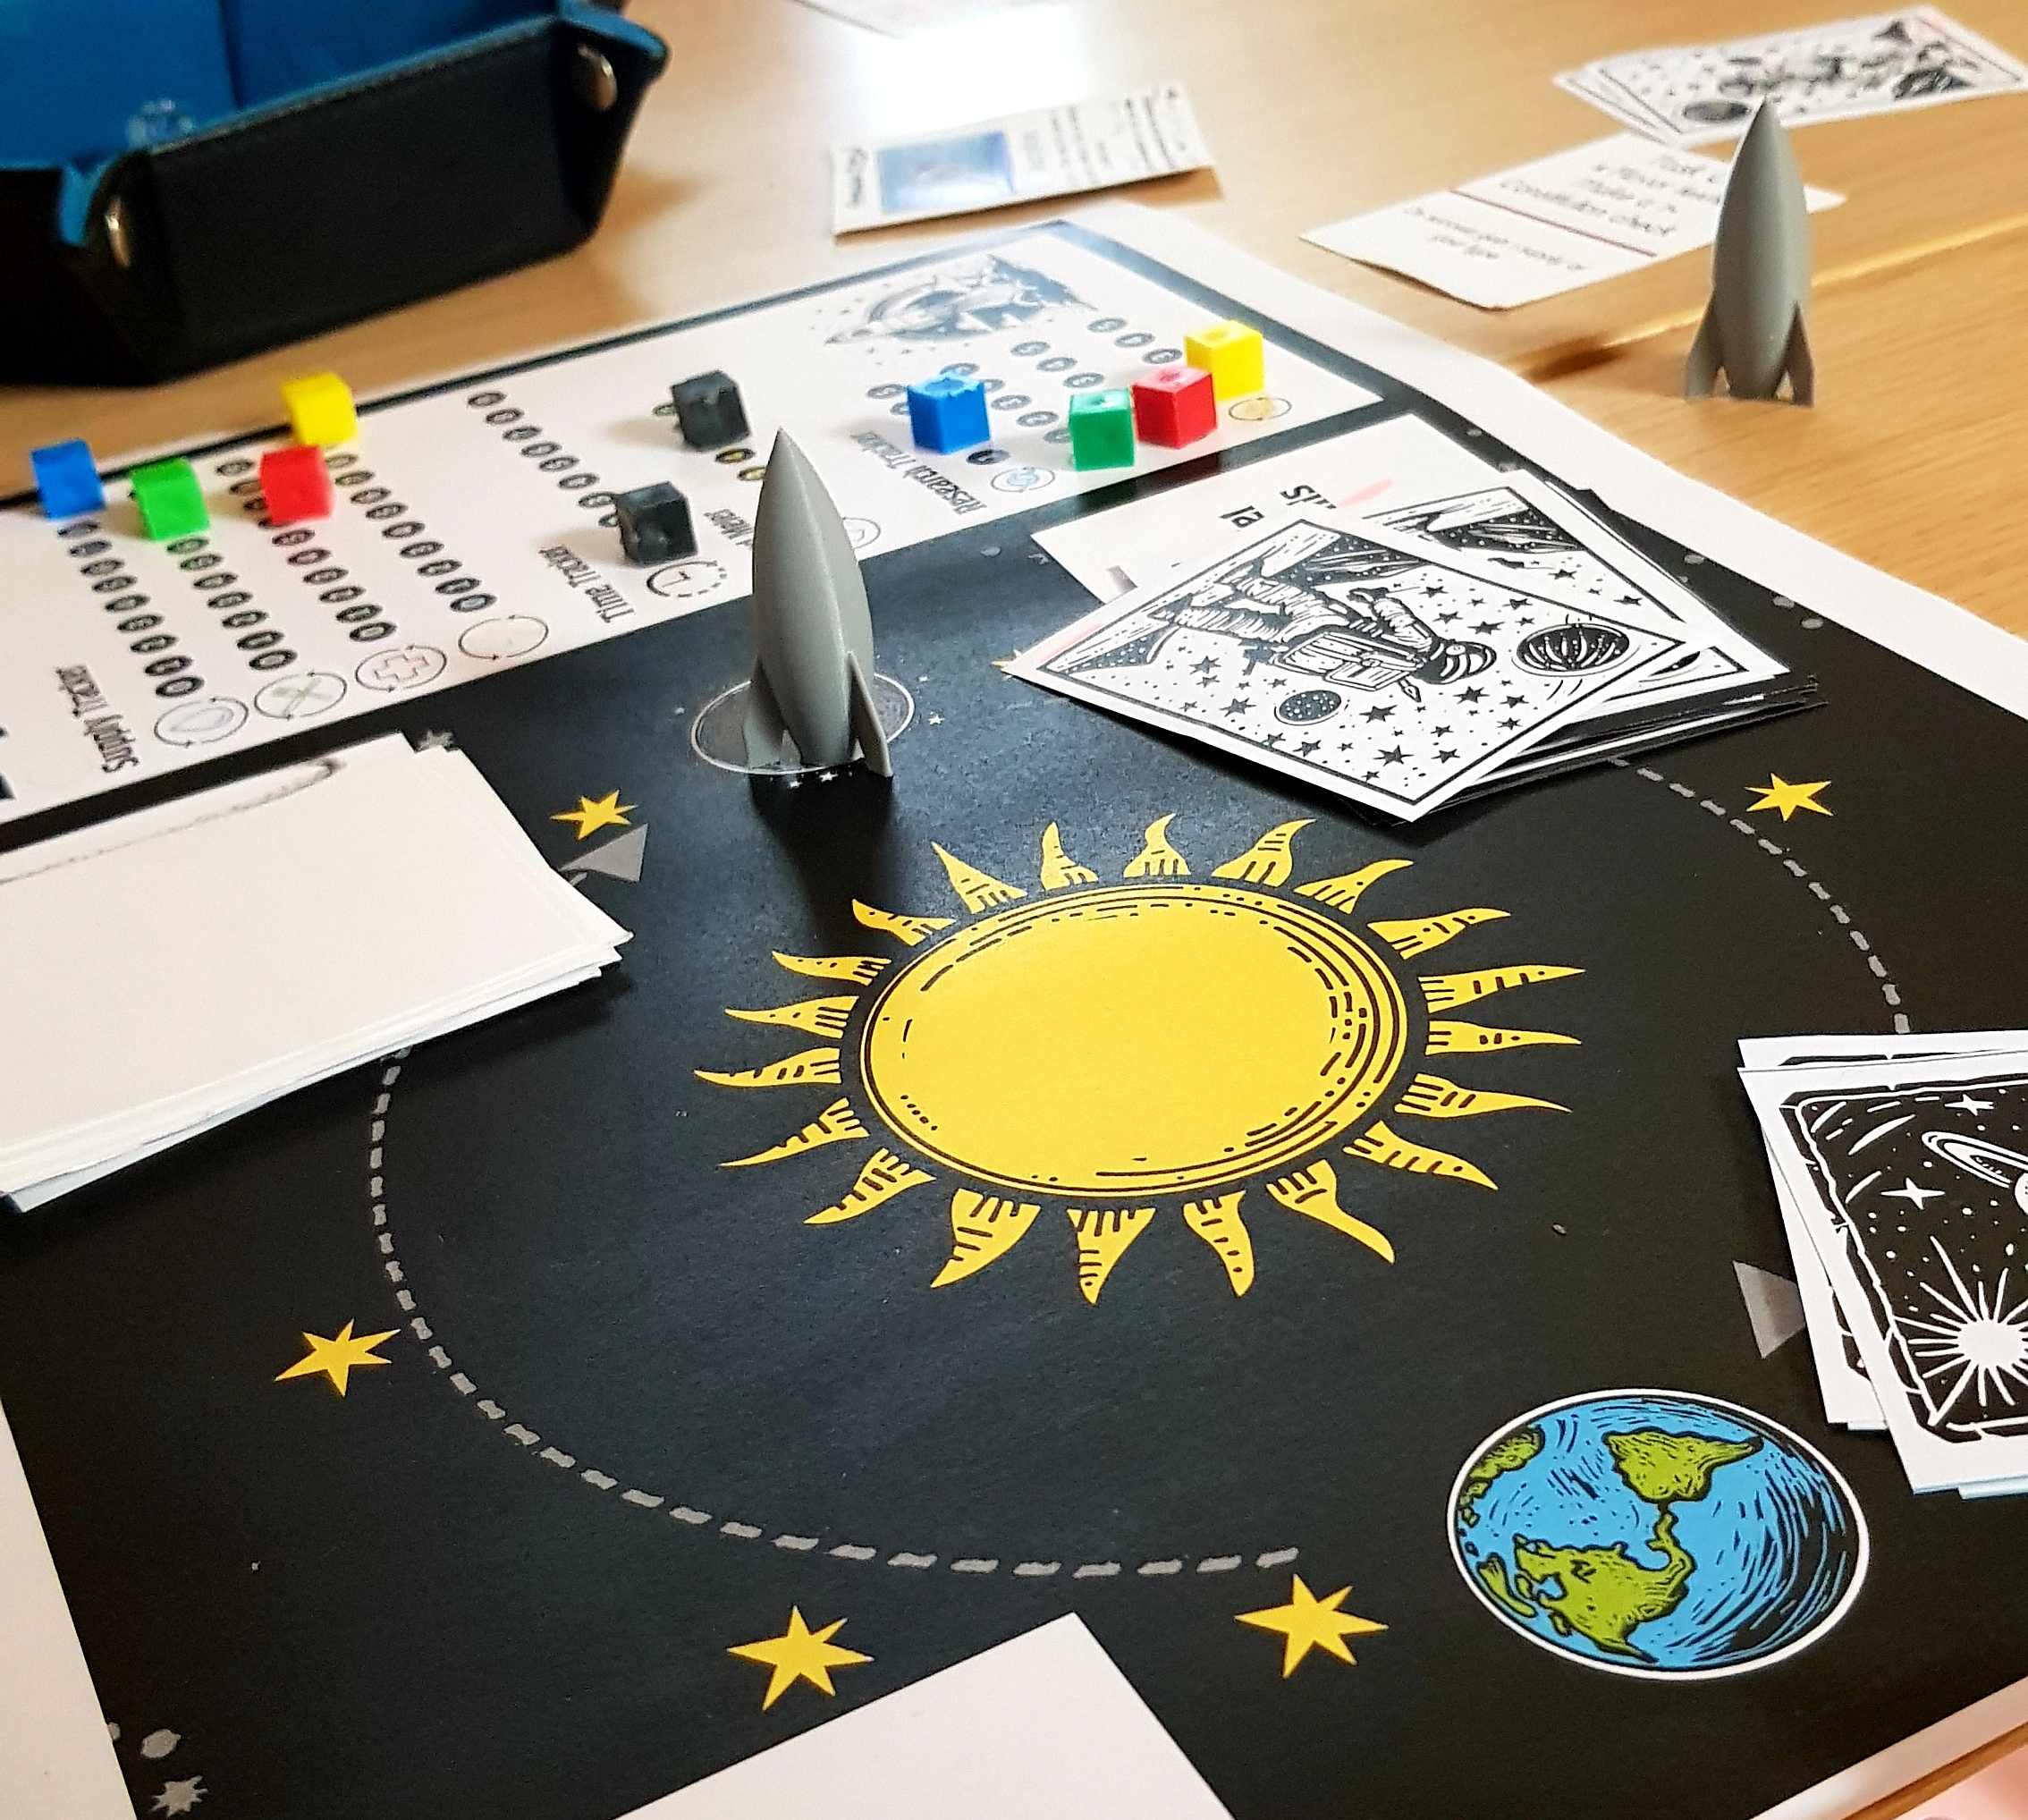 A resources management board game created by students inspired by IdeaSquare Planet